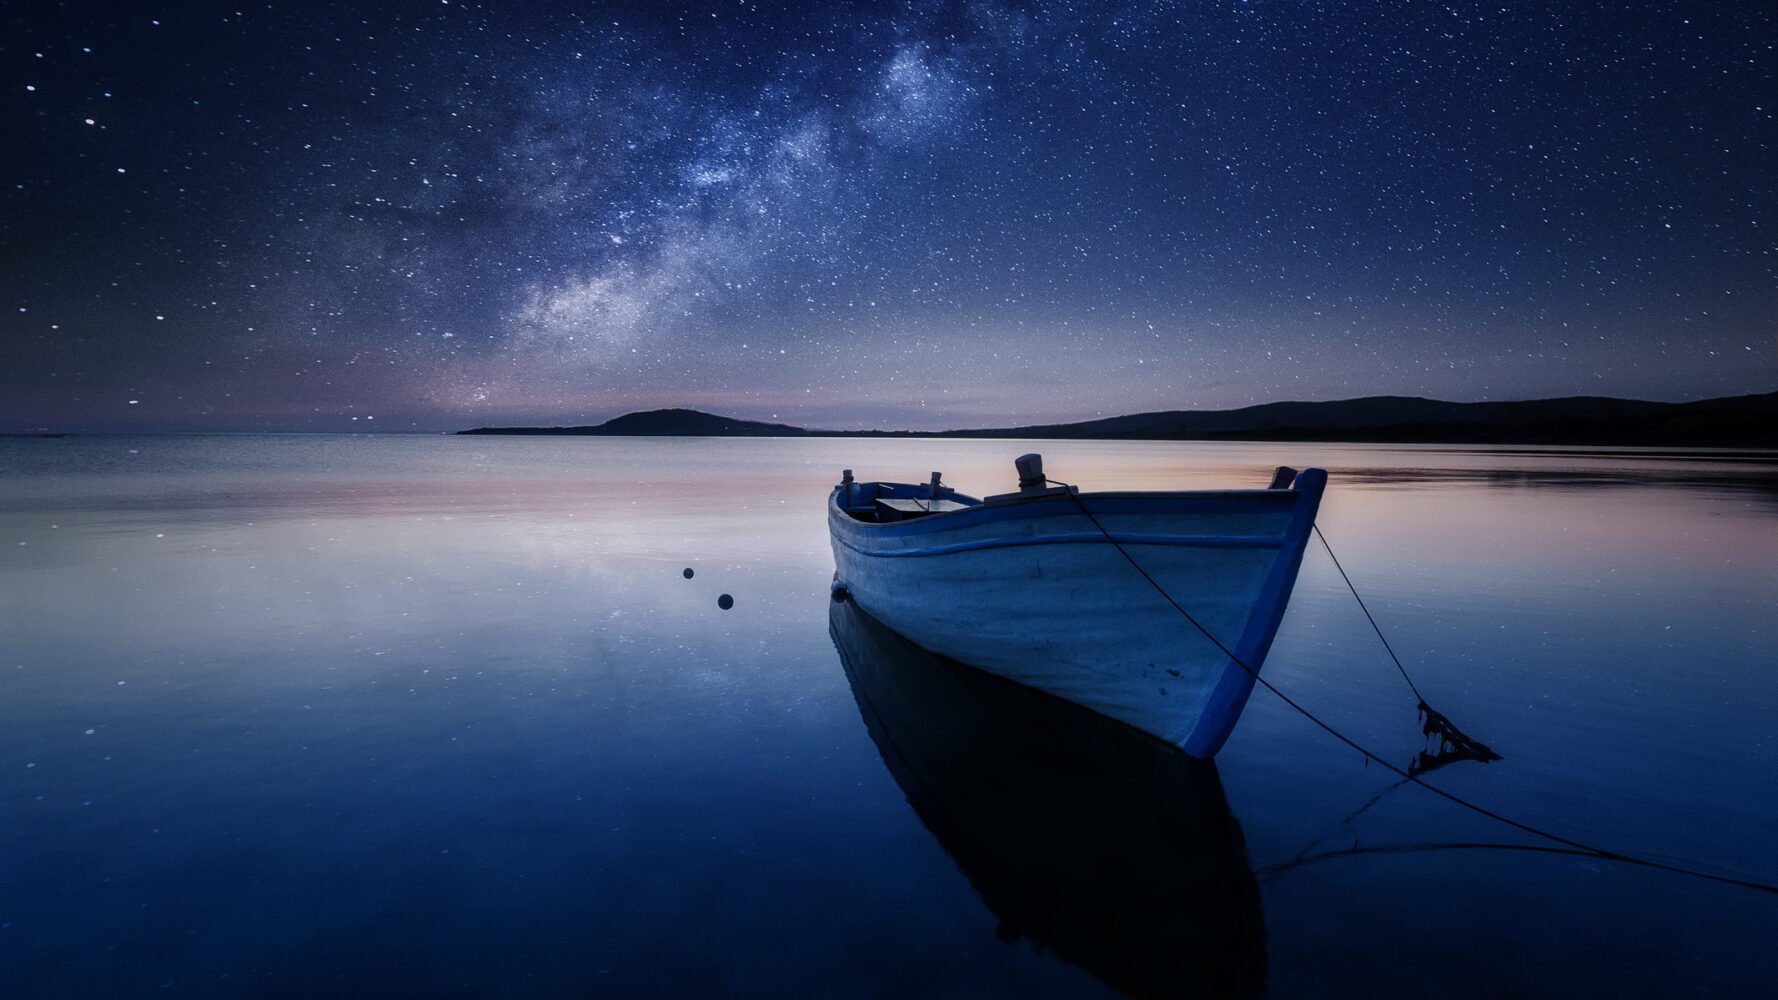 a rowboat tethered under an ethereal, dreamlike night sky reflected in perfectly still waters